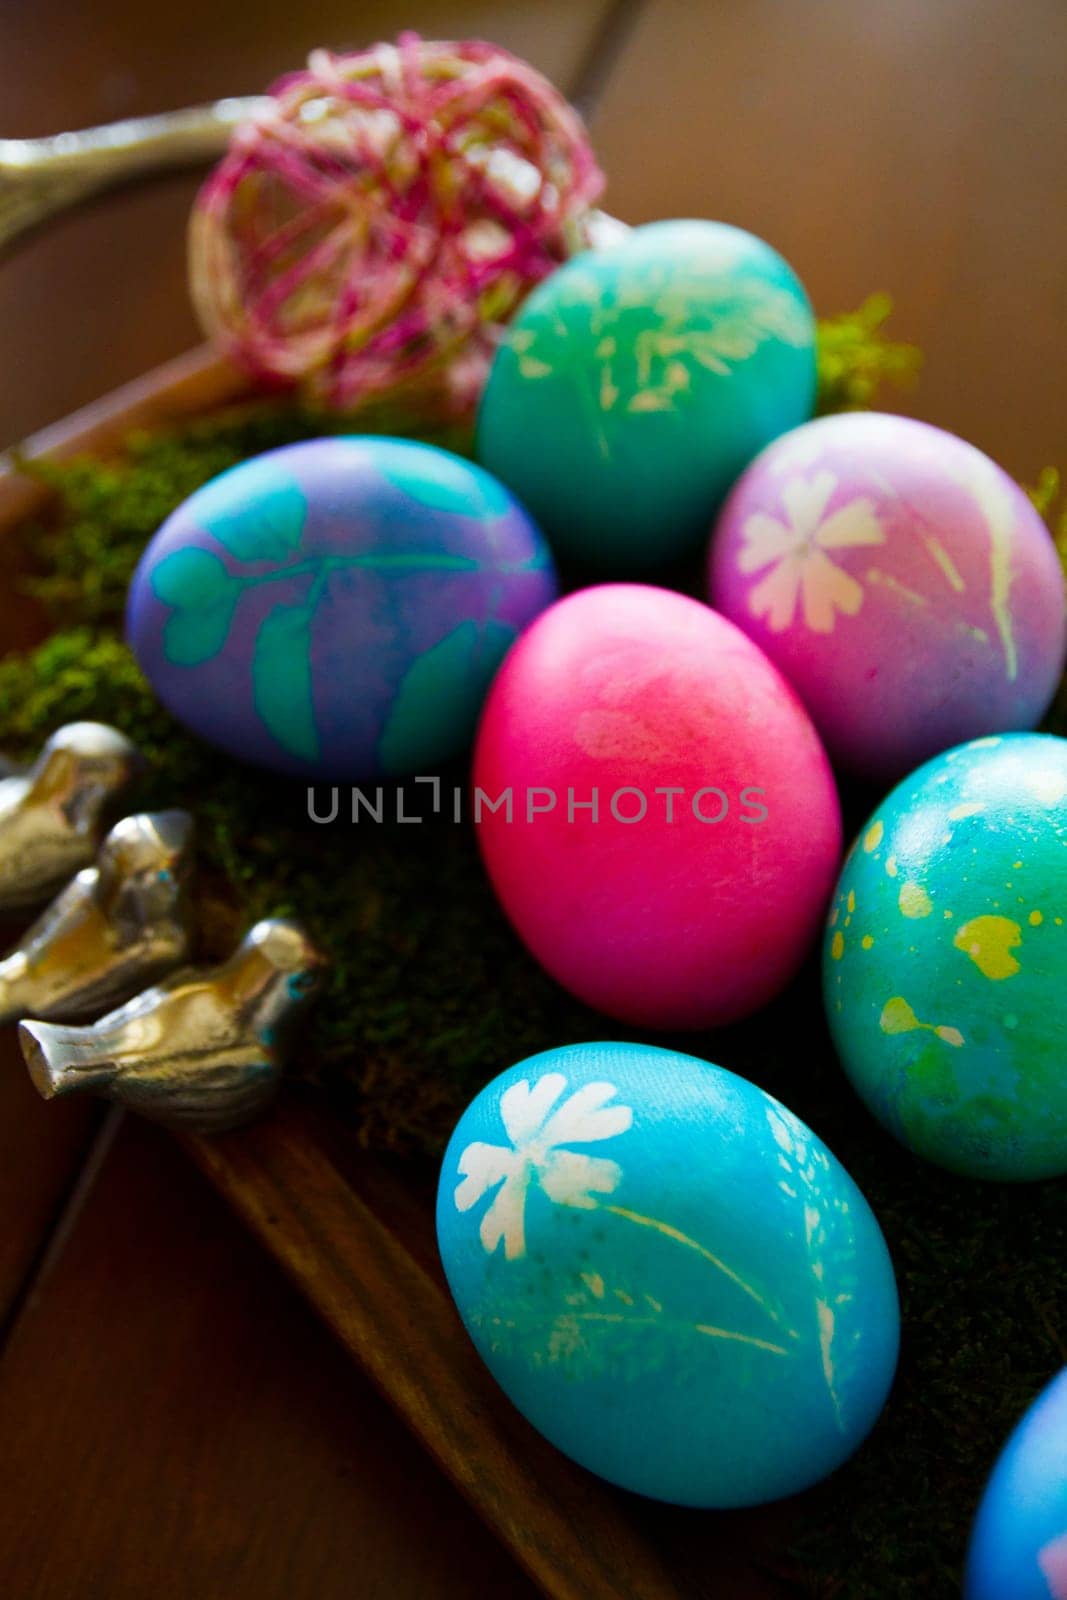 Easter egg extravaganza! Colorful and vibrant eggs adorned with intricate patterns rest on a bed of lush green moss, creating a festive ambiance. Perfect for spring celebrations and holiday decorations. Fort Wayne, Indiana.